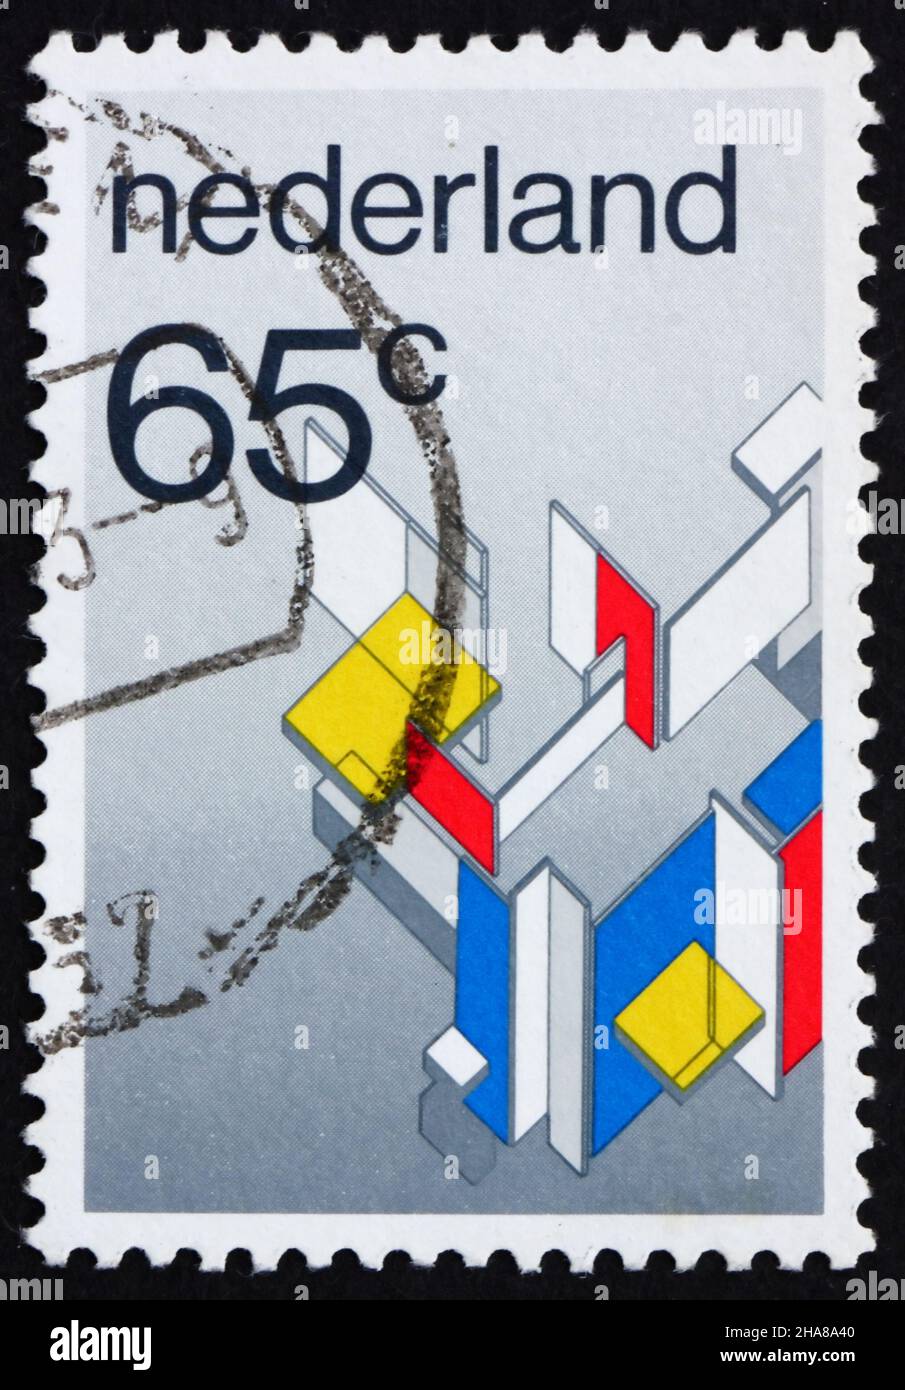 NETHERLANDS - CIRCA 1983: a stamp printed in the Netherlands shows Maison Particuliere contra Construction, by C. van Eesteren and T. van Doesburg, Mo Stock Photo